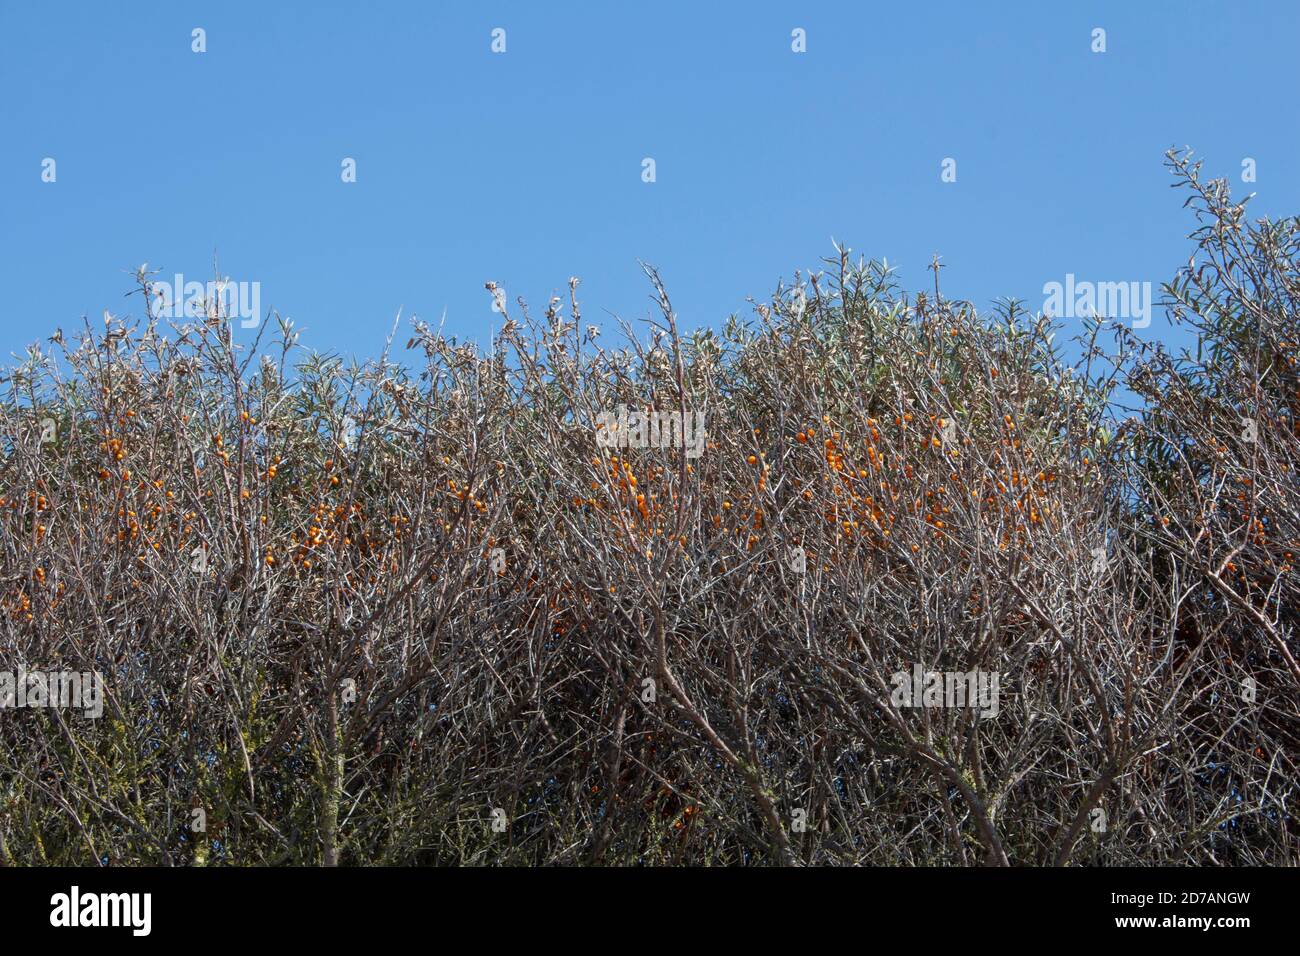 Leafless Bushes or Shrubs with Orange Berries Stock Photo